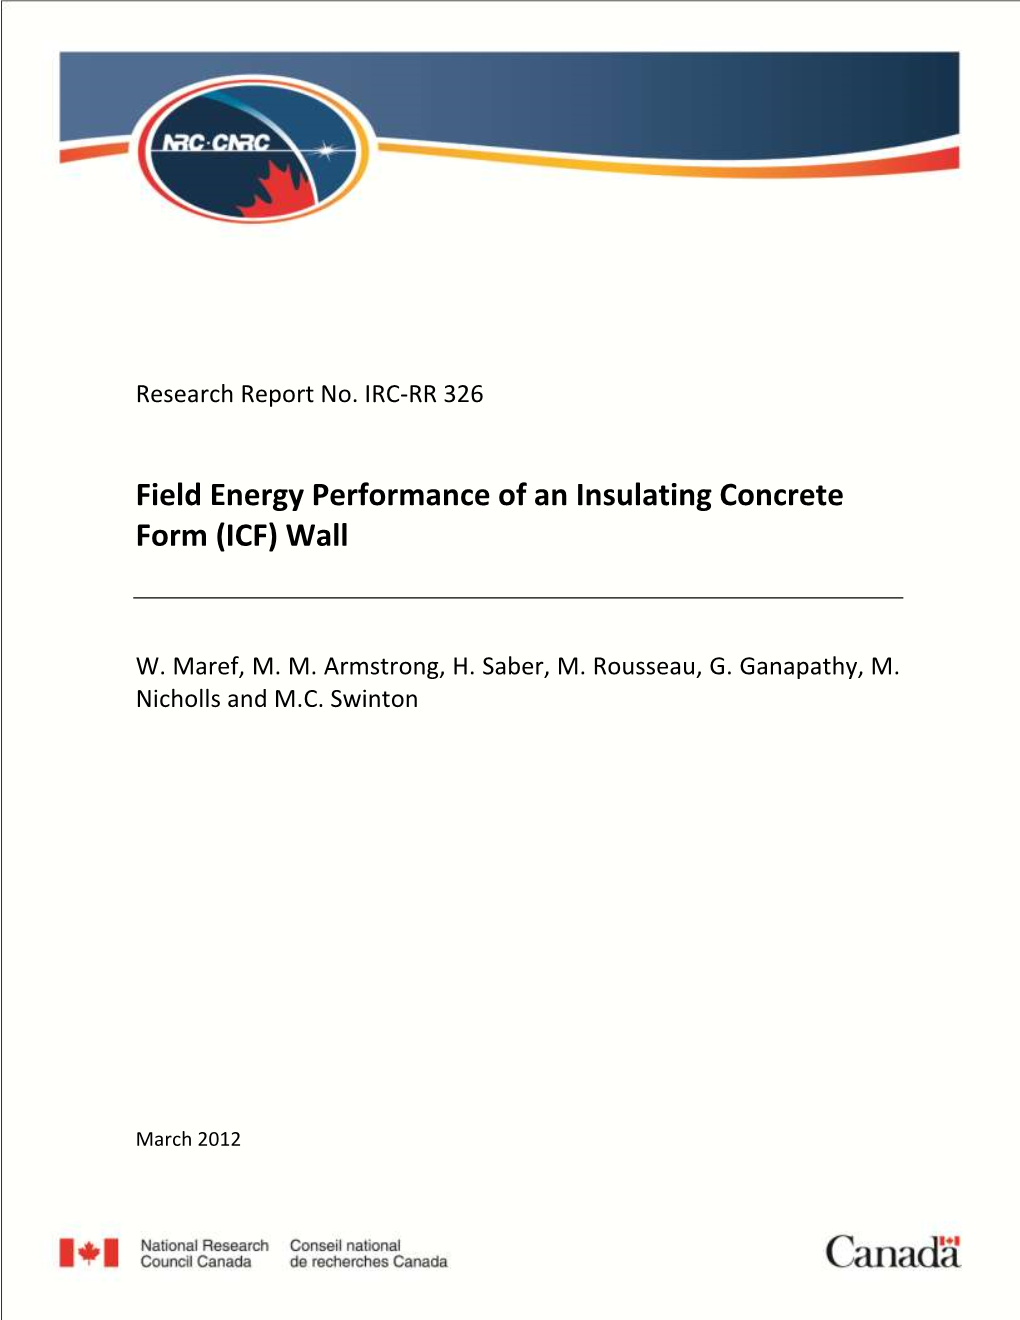 Field Energy Performance of an Insulating Concrete Form (ICF) Wall